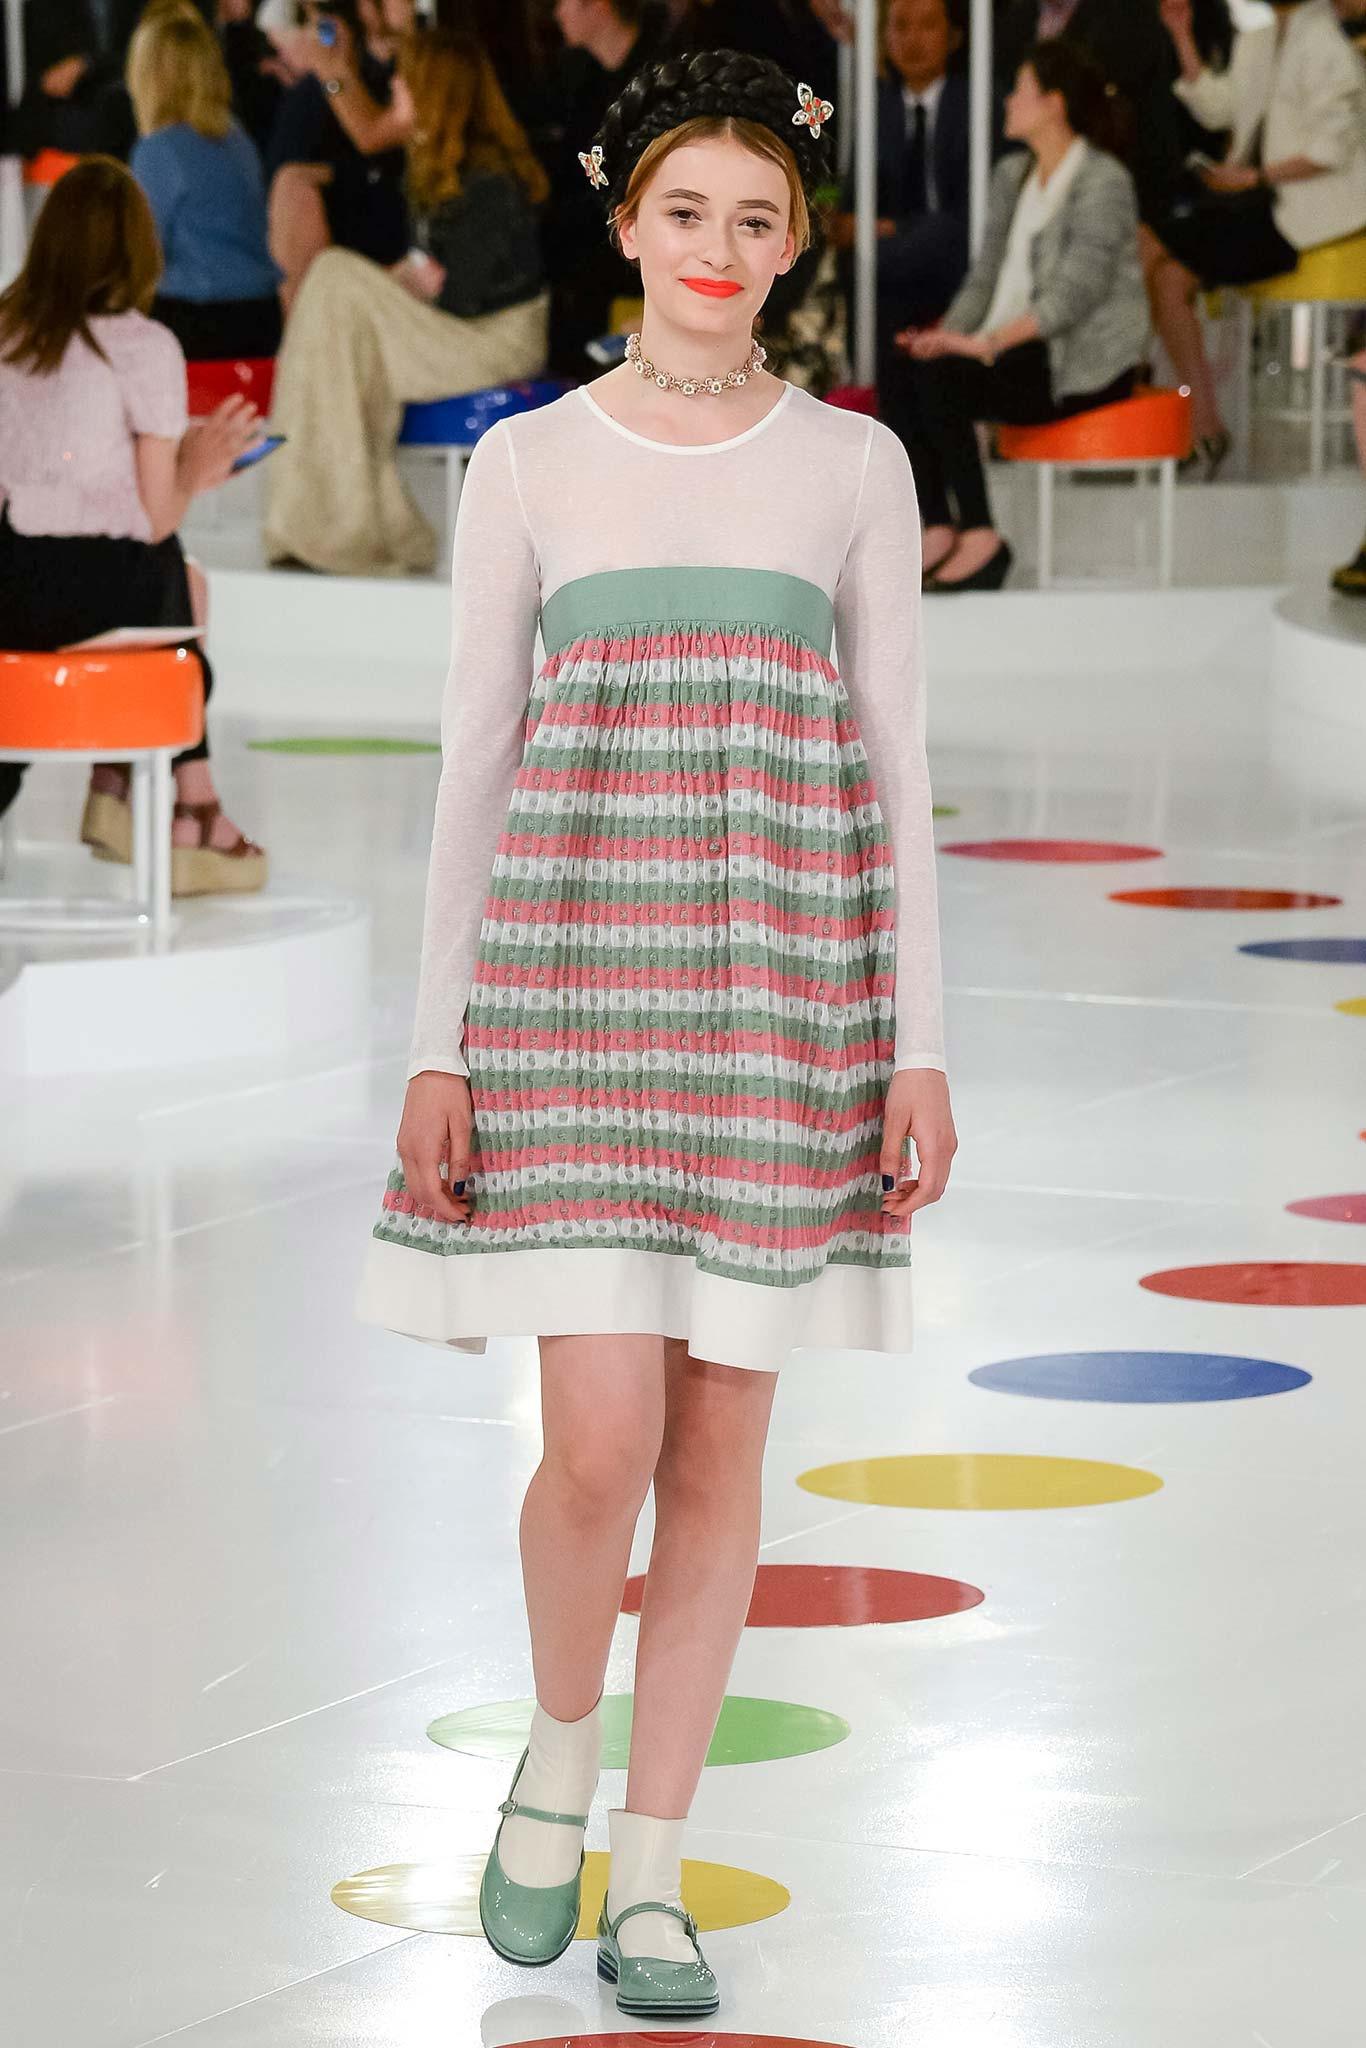 Playful and bright Chanel flare dress from Runway of Paris / SEOUL Collection, 2016 Cruise, 16C
- CC logo buttons at back and cuffs
- fully lined
Size mark 36 fr. Condition is pristine, kept unworn.